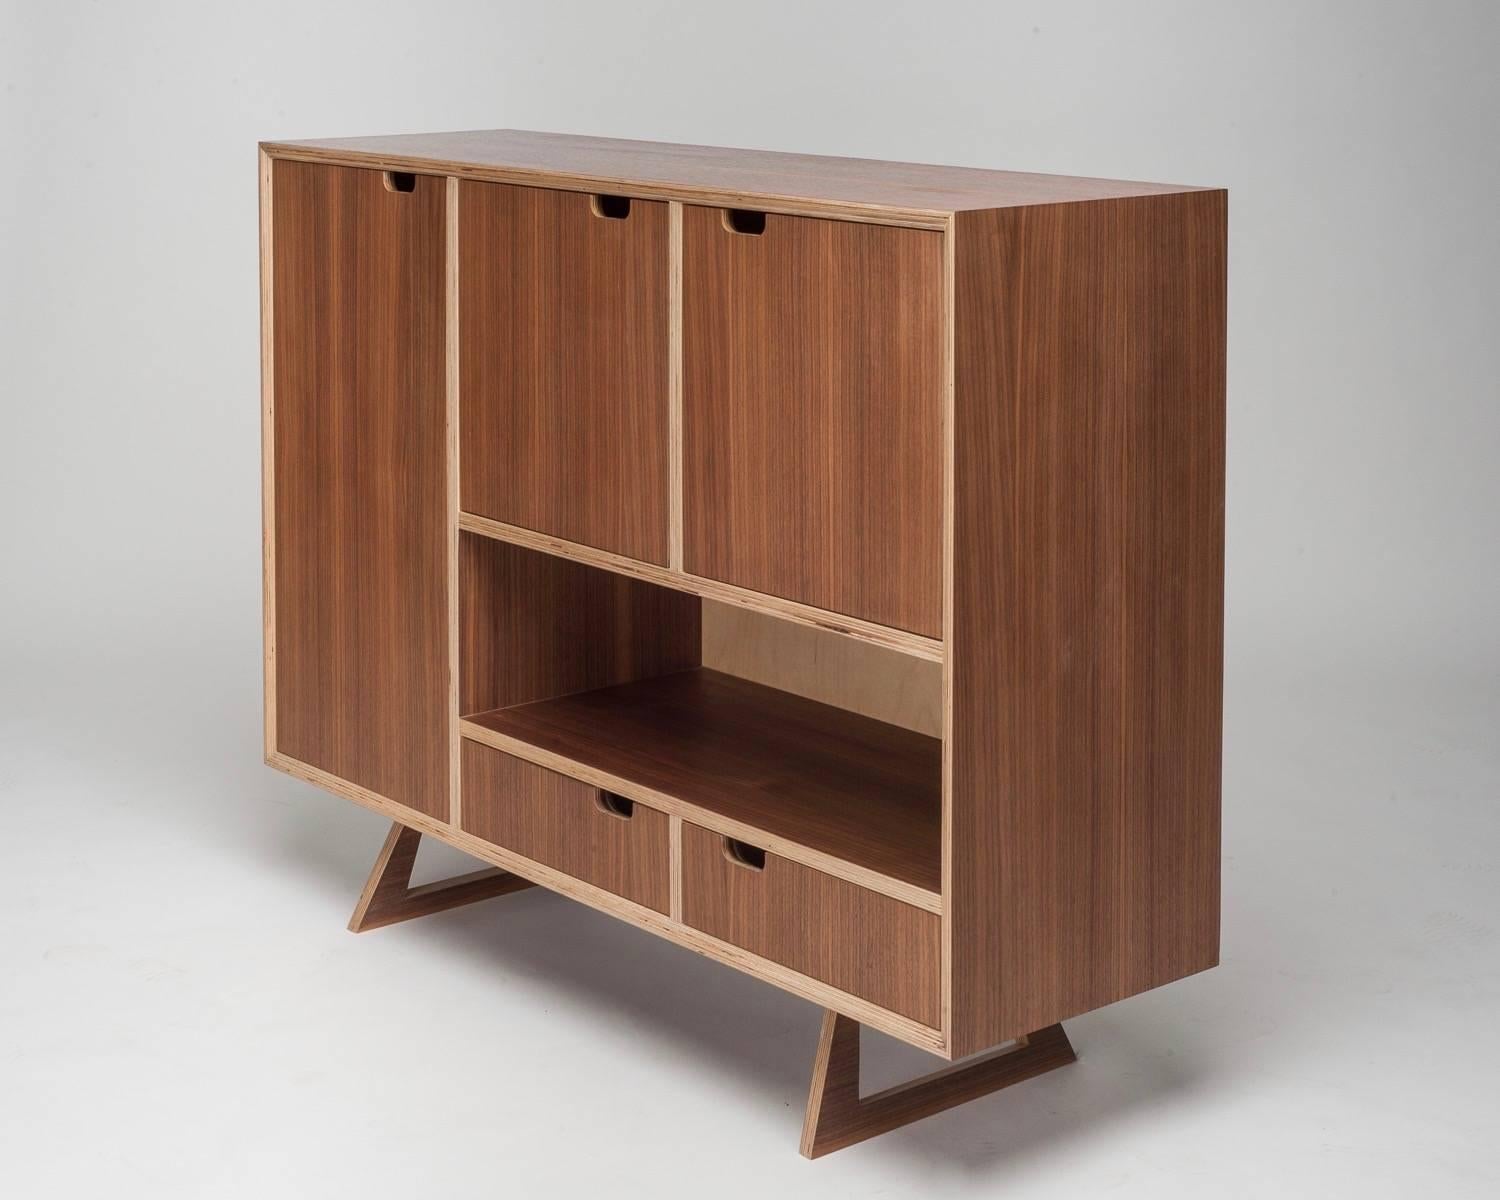 The Bercil sideboard seen here in American walnut. This piece is made to order, so veneer finishes and dimensions can be changed.